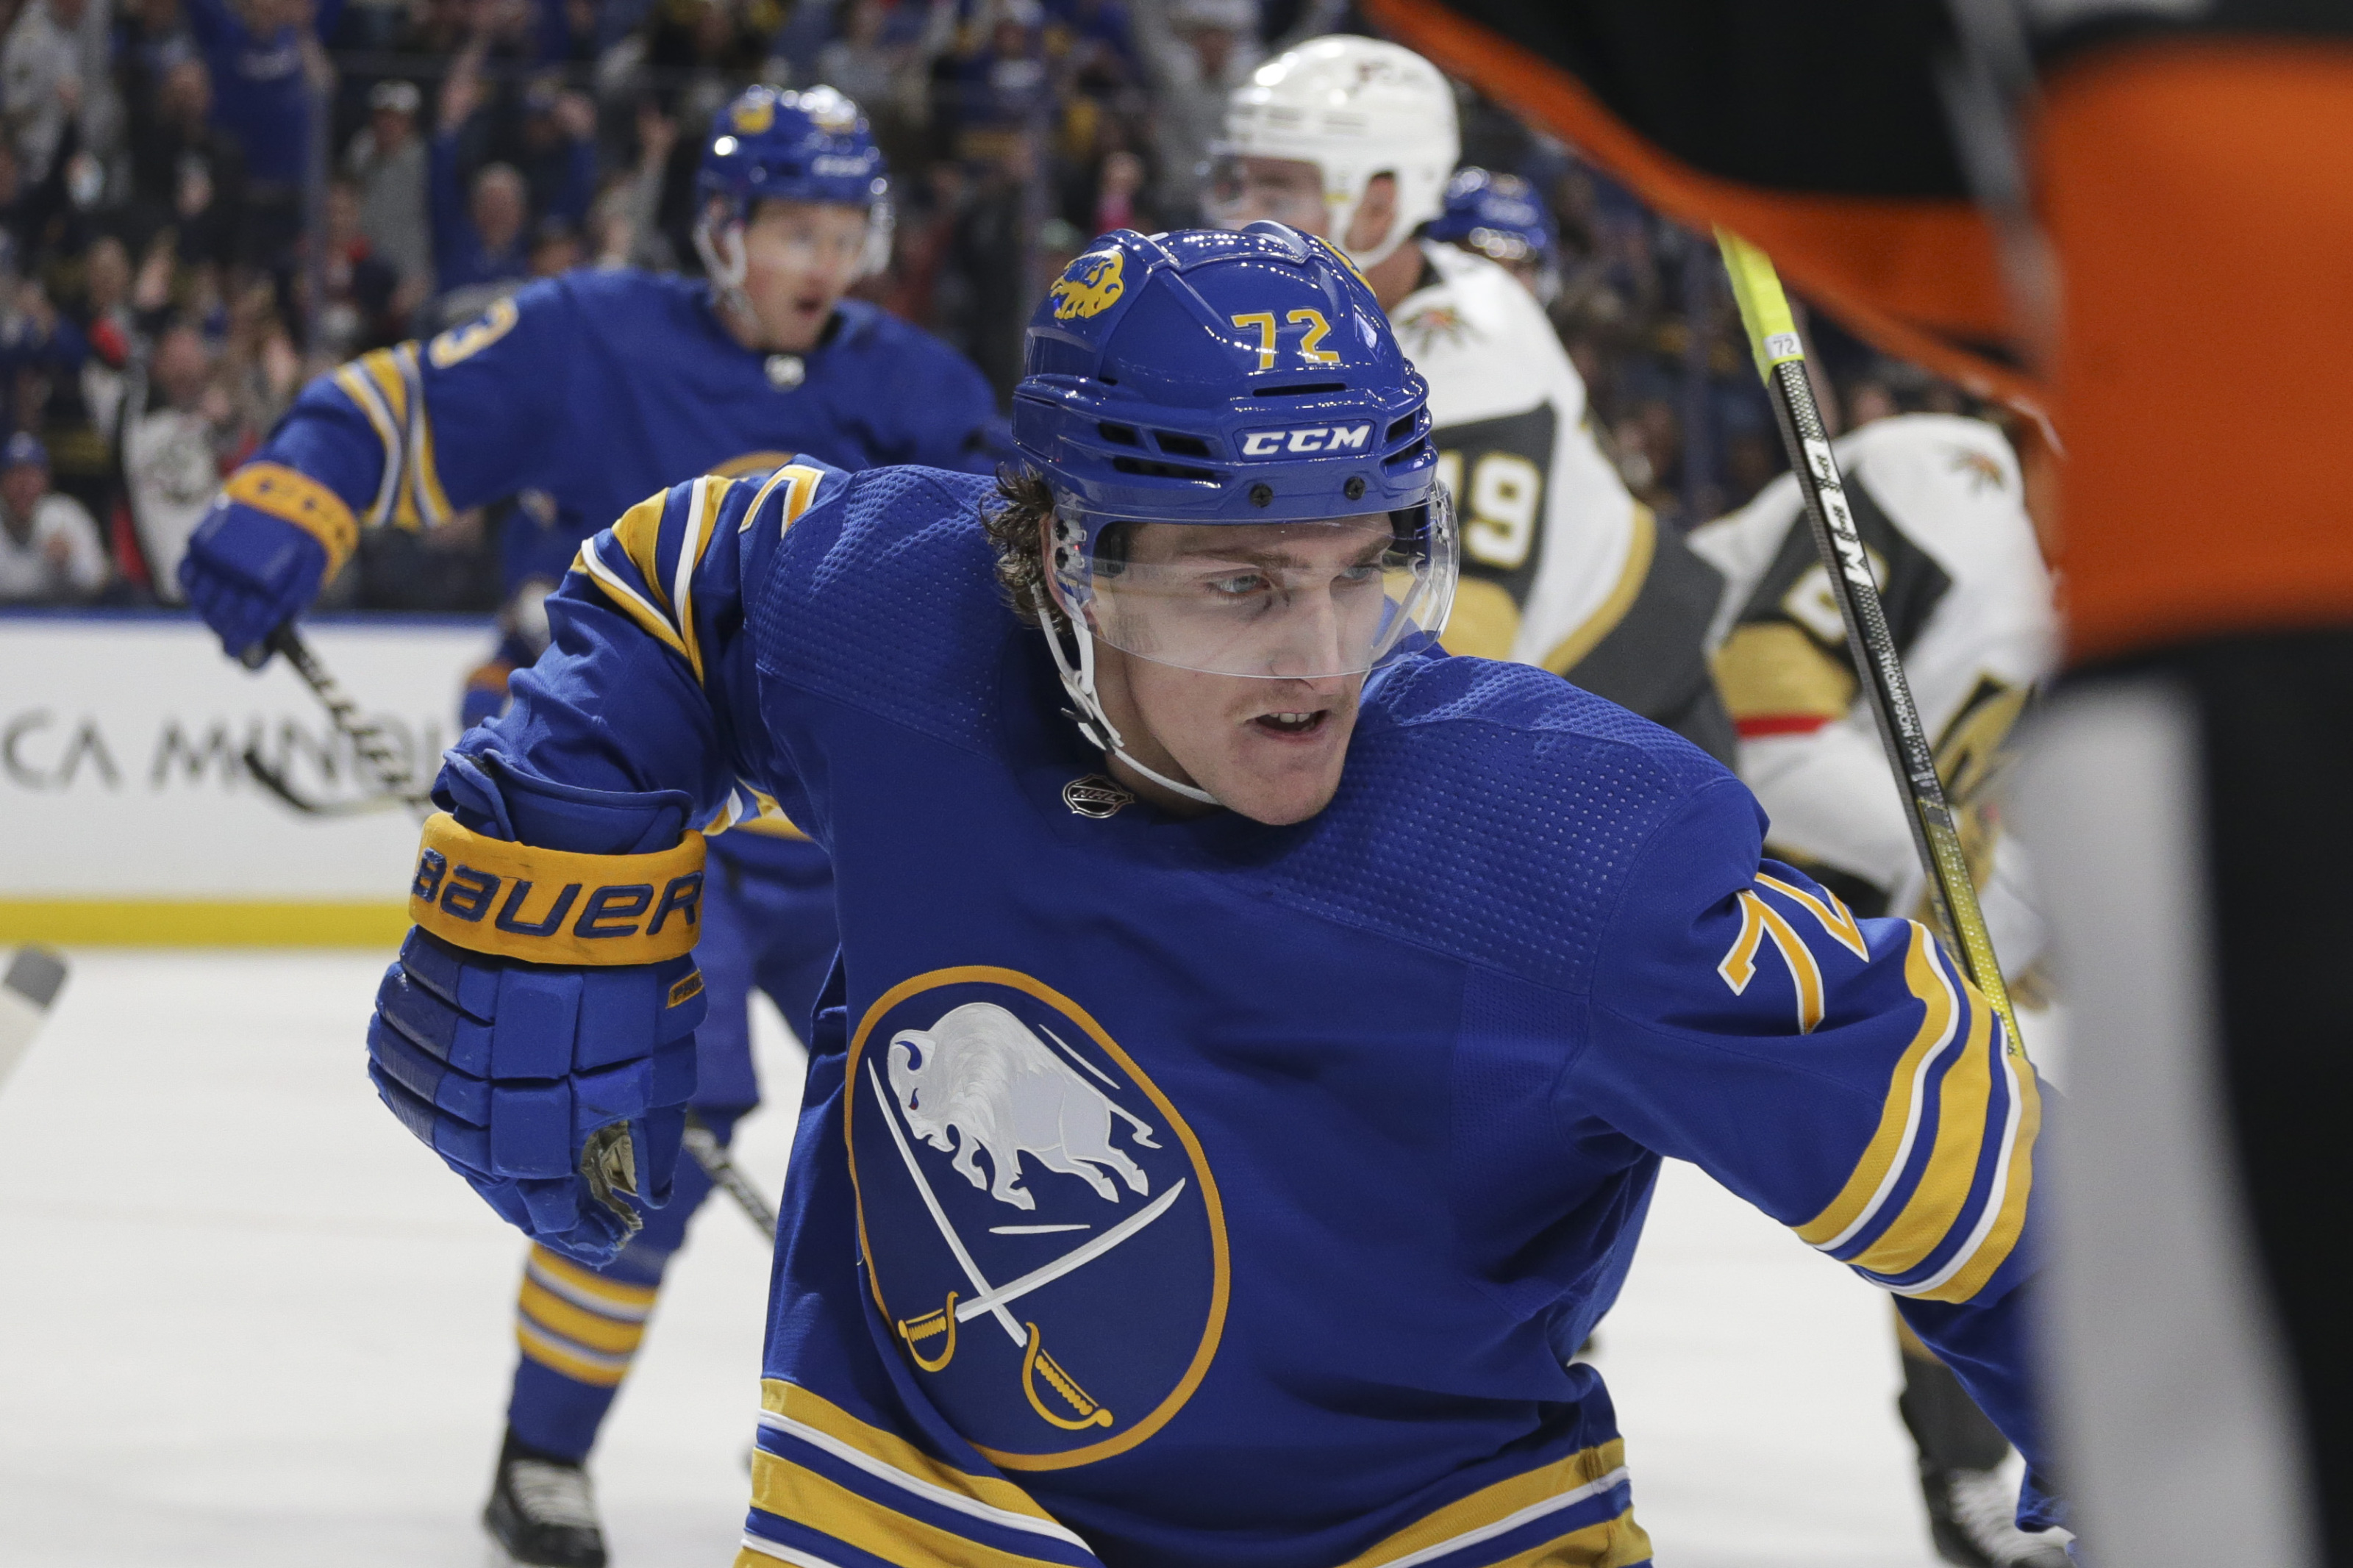 How long until Tage Thompson is captain of Buffalo? : r/nhl